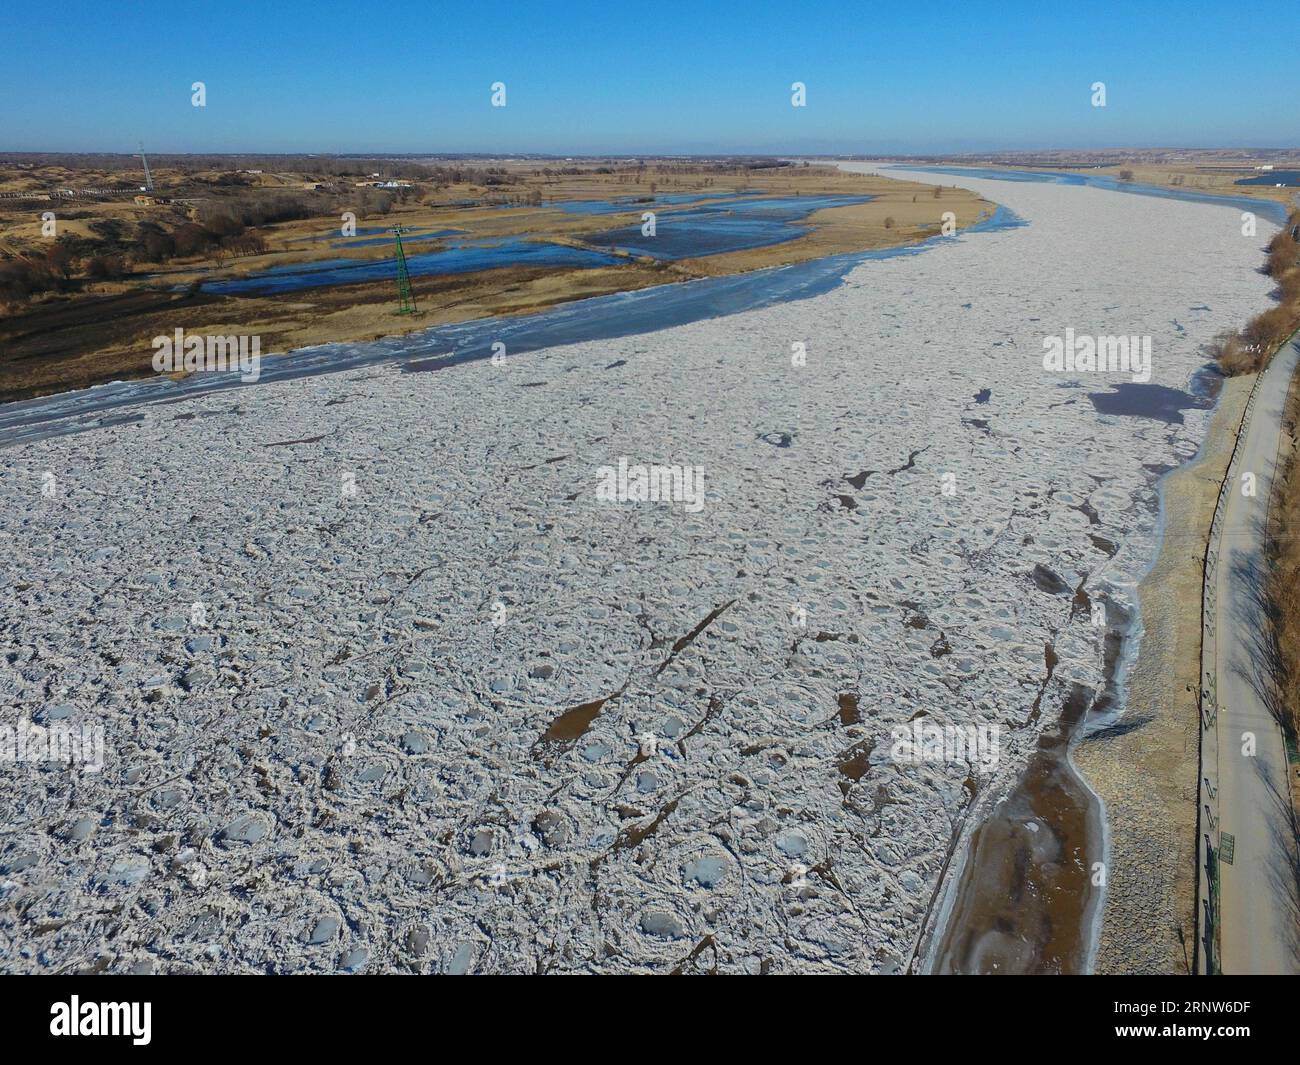 (171205) -- HOHHOT, Dec. 5, 2017 -- Photo taken on Dec. 5, 2017 shows the frozen Yellow River at Togtoh section in north China s Inner Mongolia Autonomous Region. The length of frozen section of the Yellow River in Inner Mongolia has reached 139 kilometers by 4:00 p.m. Tuesday. The Yellow River Flood Control and Drought Relief Headquarters announced the beginning of the river s freeze-up period Monday. )(mcg) CHINA-YELLOW RIVER-FREEZE-UP PERIOD (CN) DengxHua PUBLICATIONxNOTxINxCHN Stock Photo